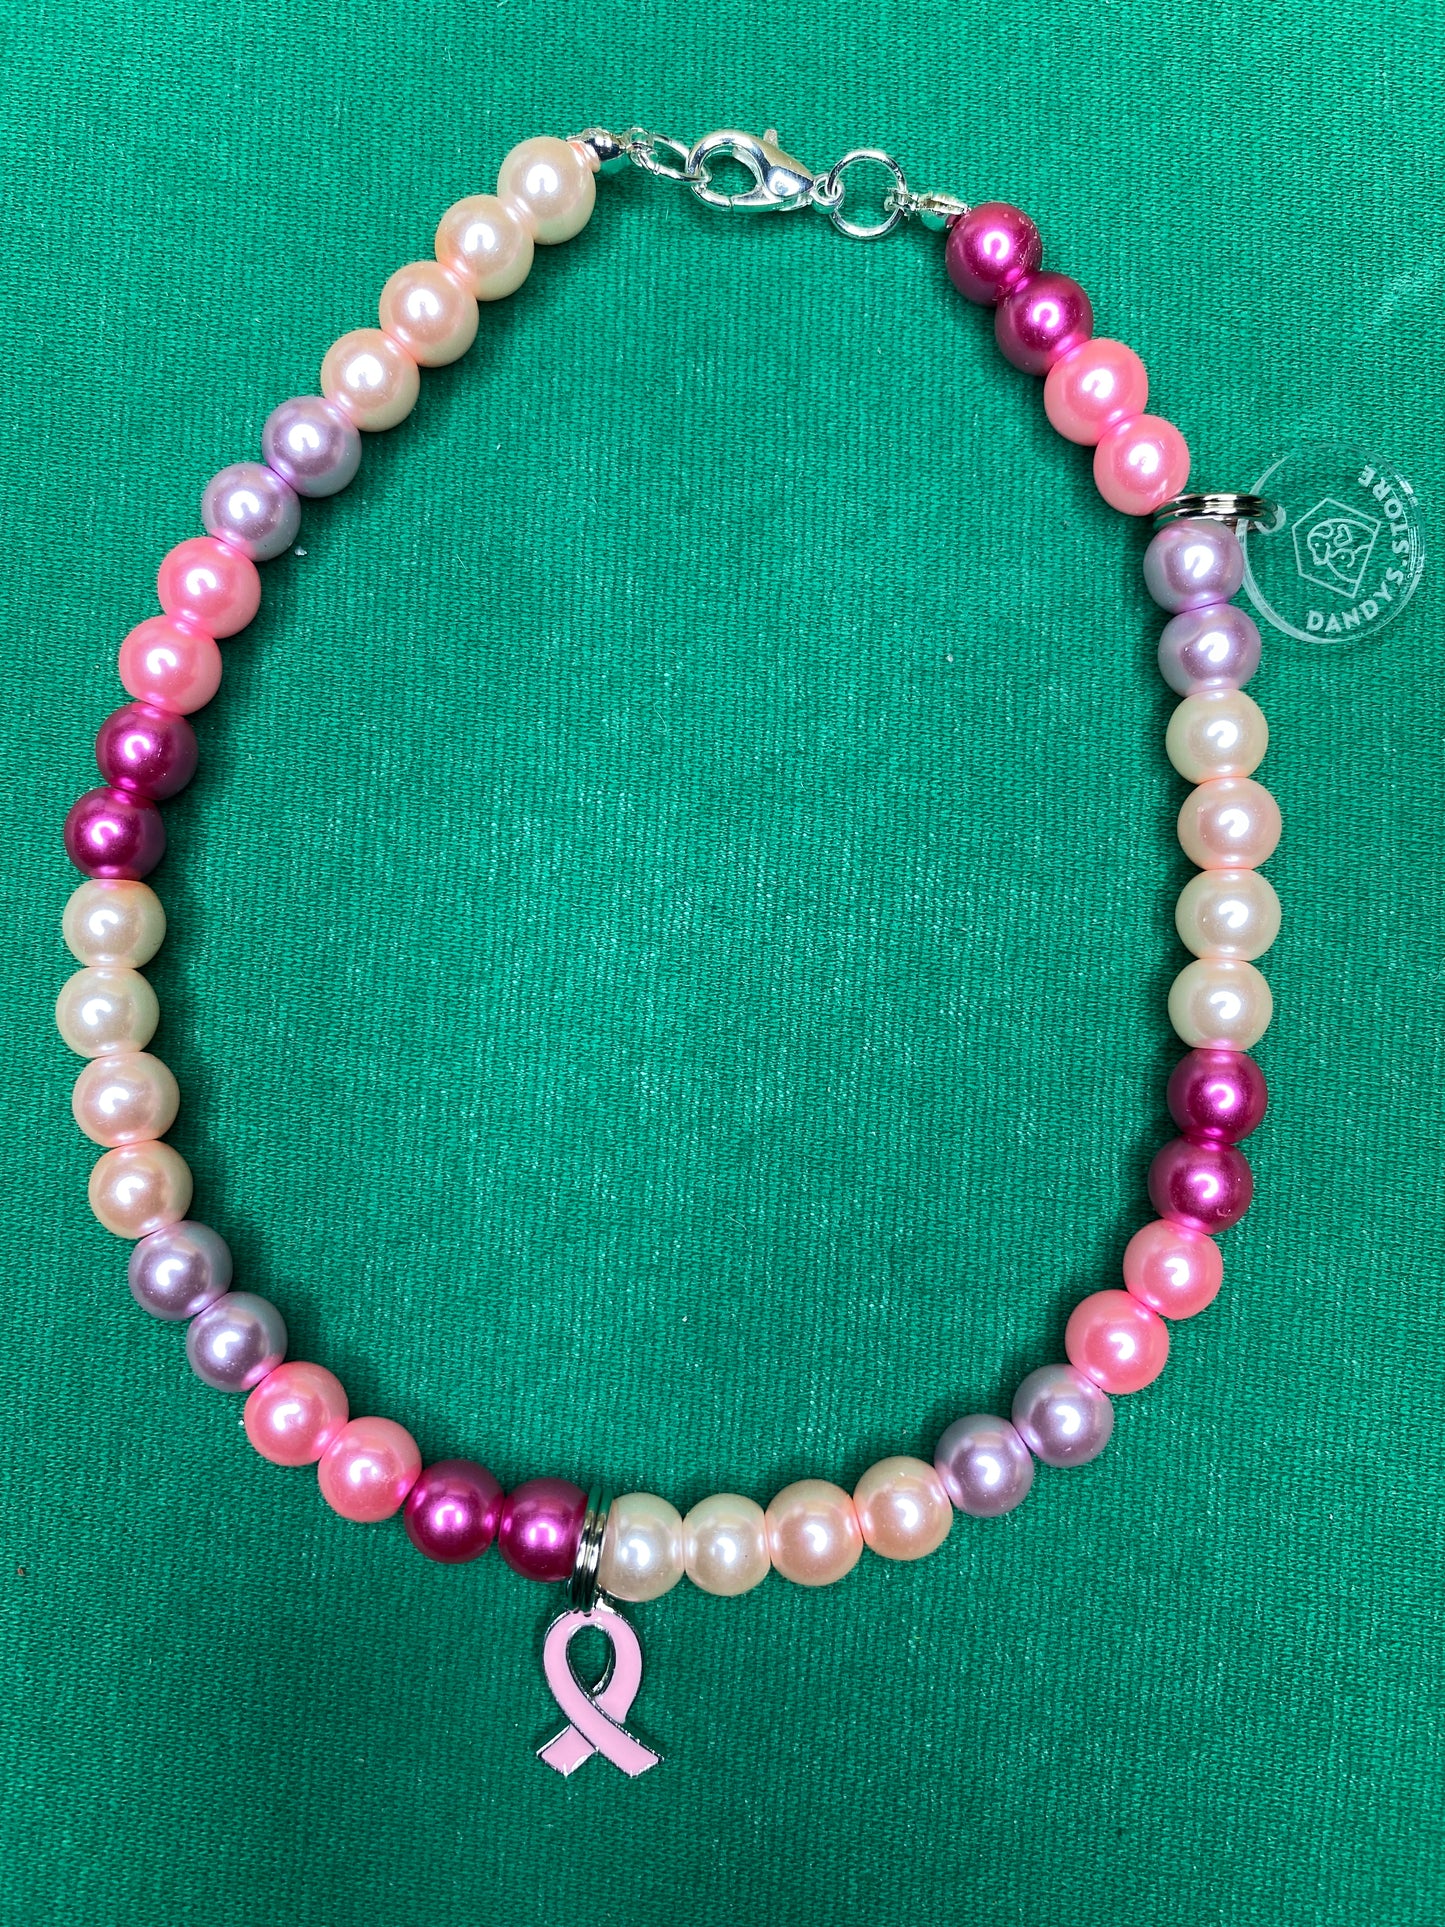 Pearl necklace with pink bow and silver clasp by Dandy's Store. Handmade with love for your Princess.